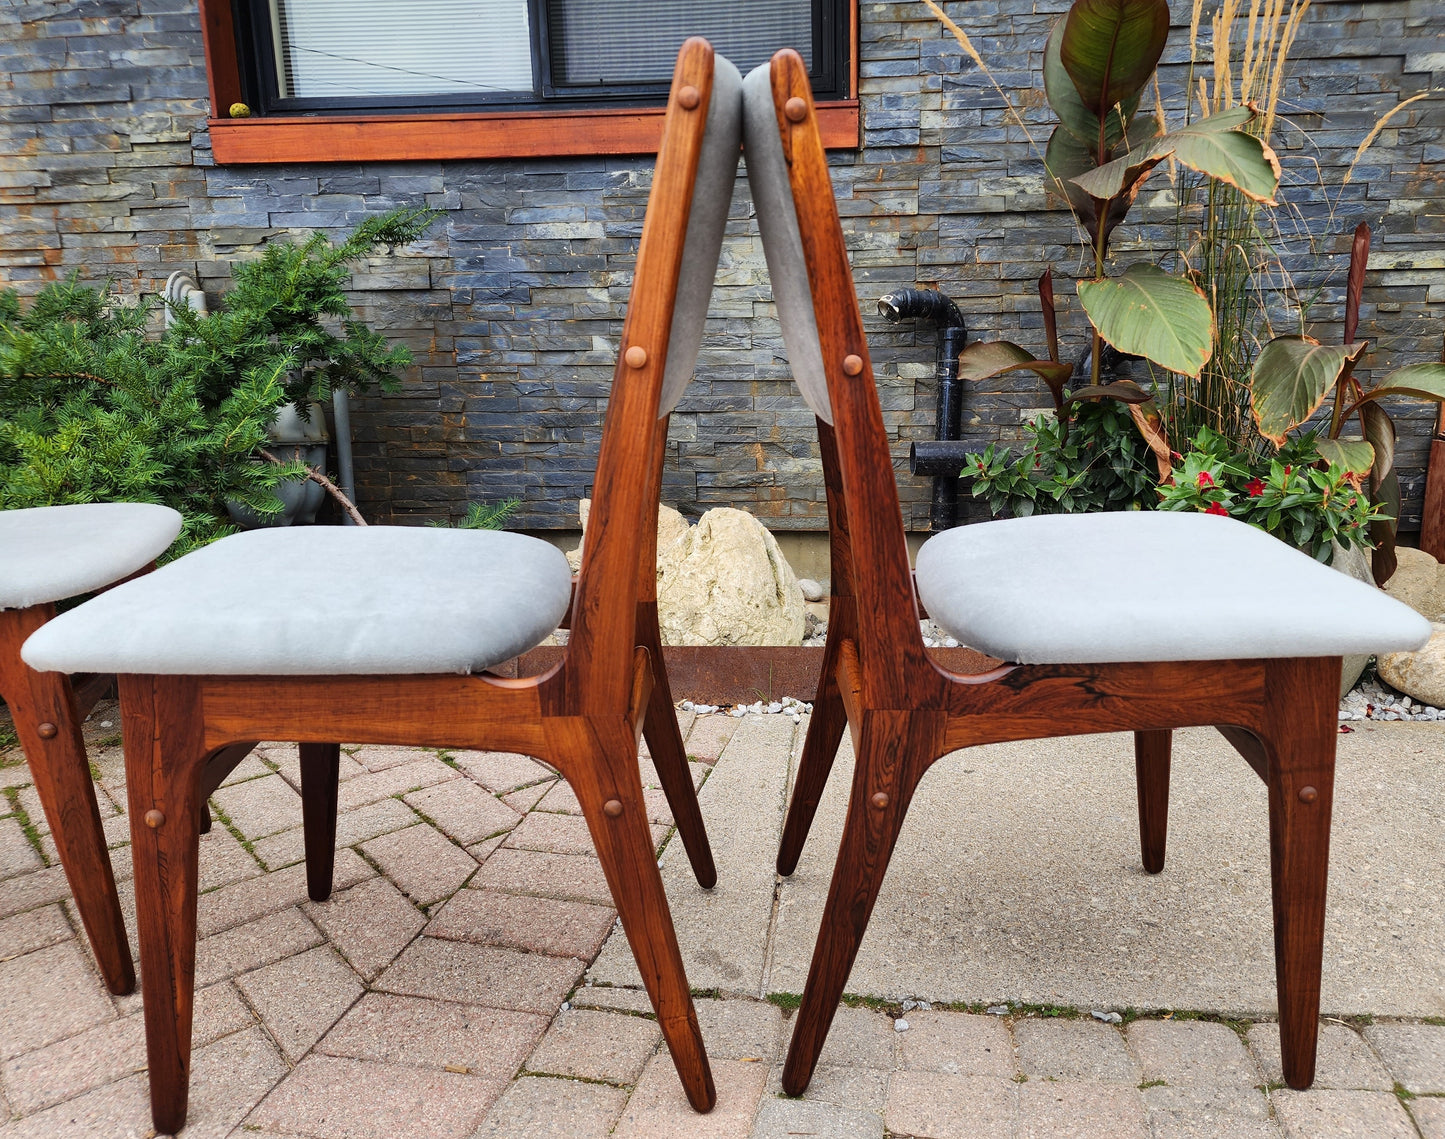 4 RESTORED REUPHOLSTERED in wool mohair Danish Mid Century Modern Brazilian Rosewood Chairs